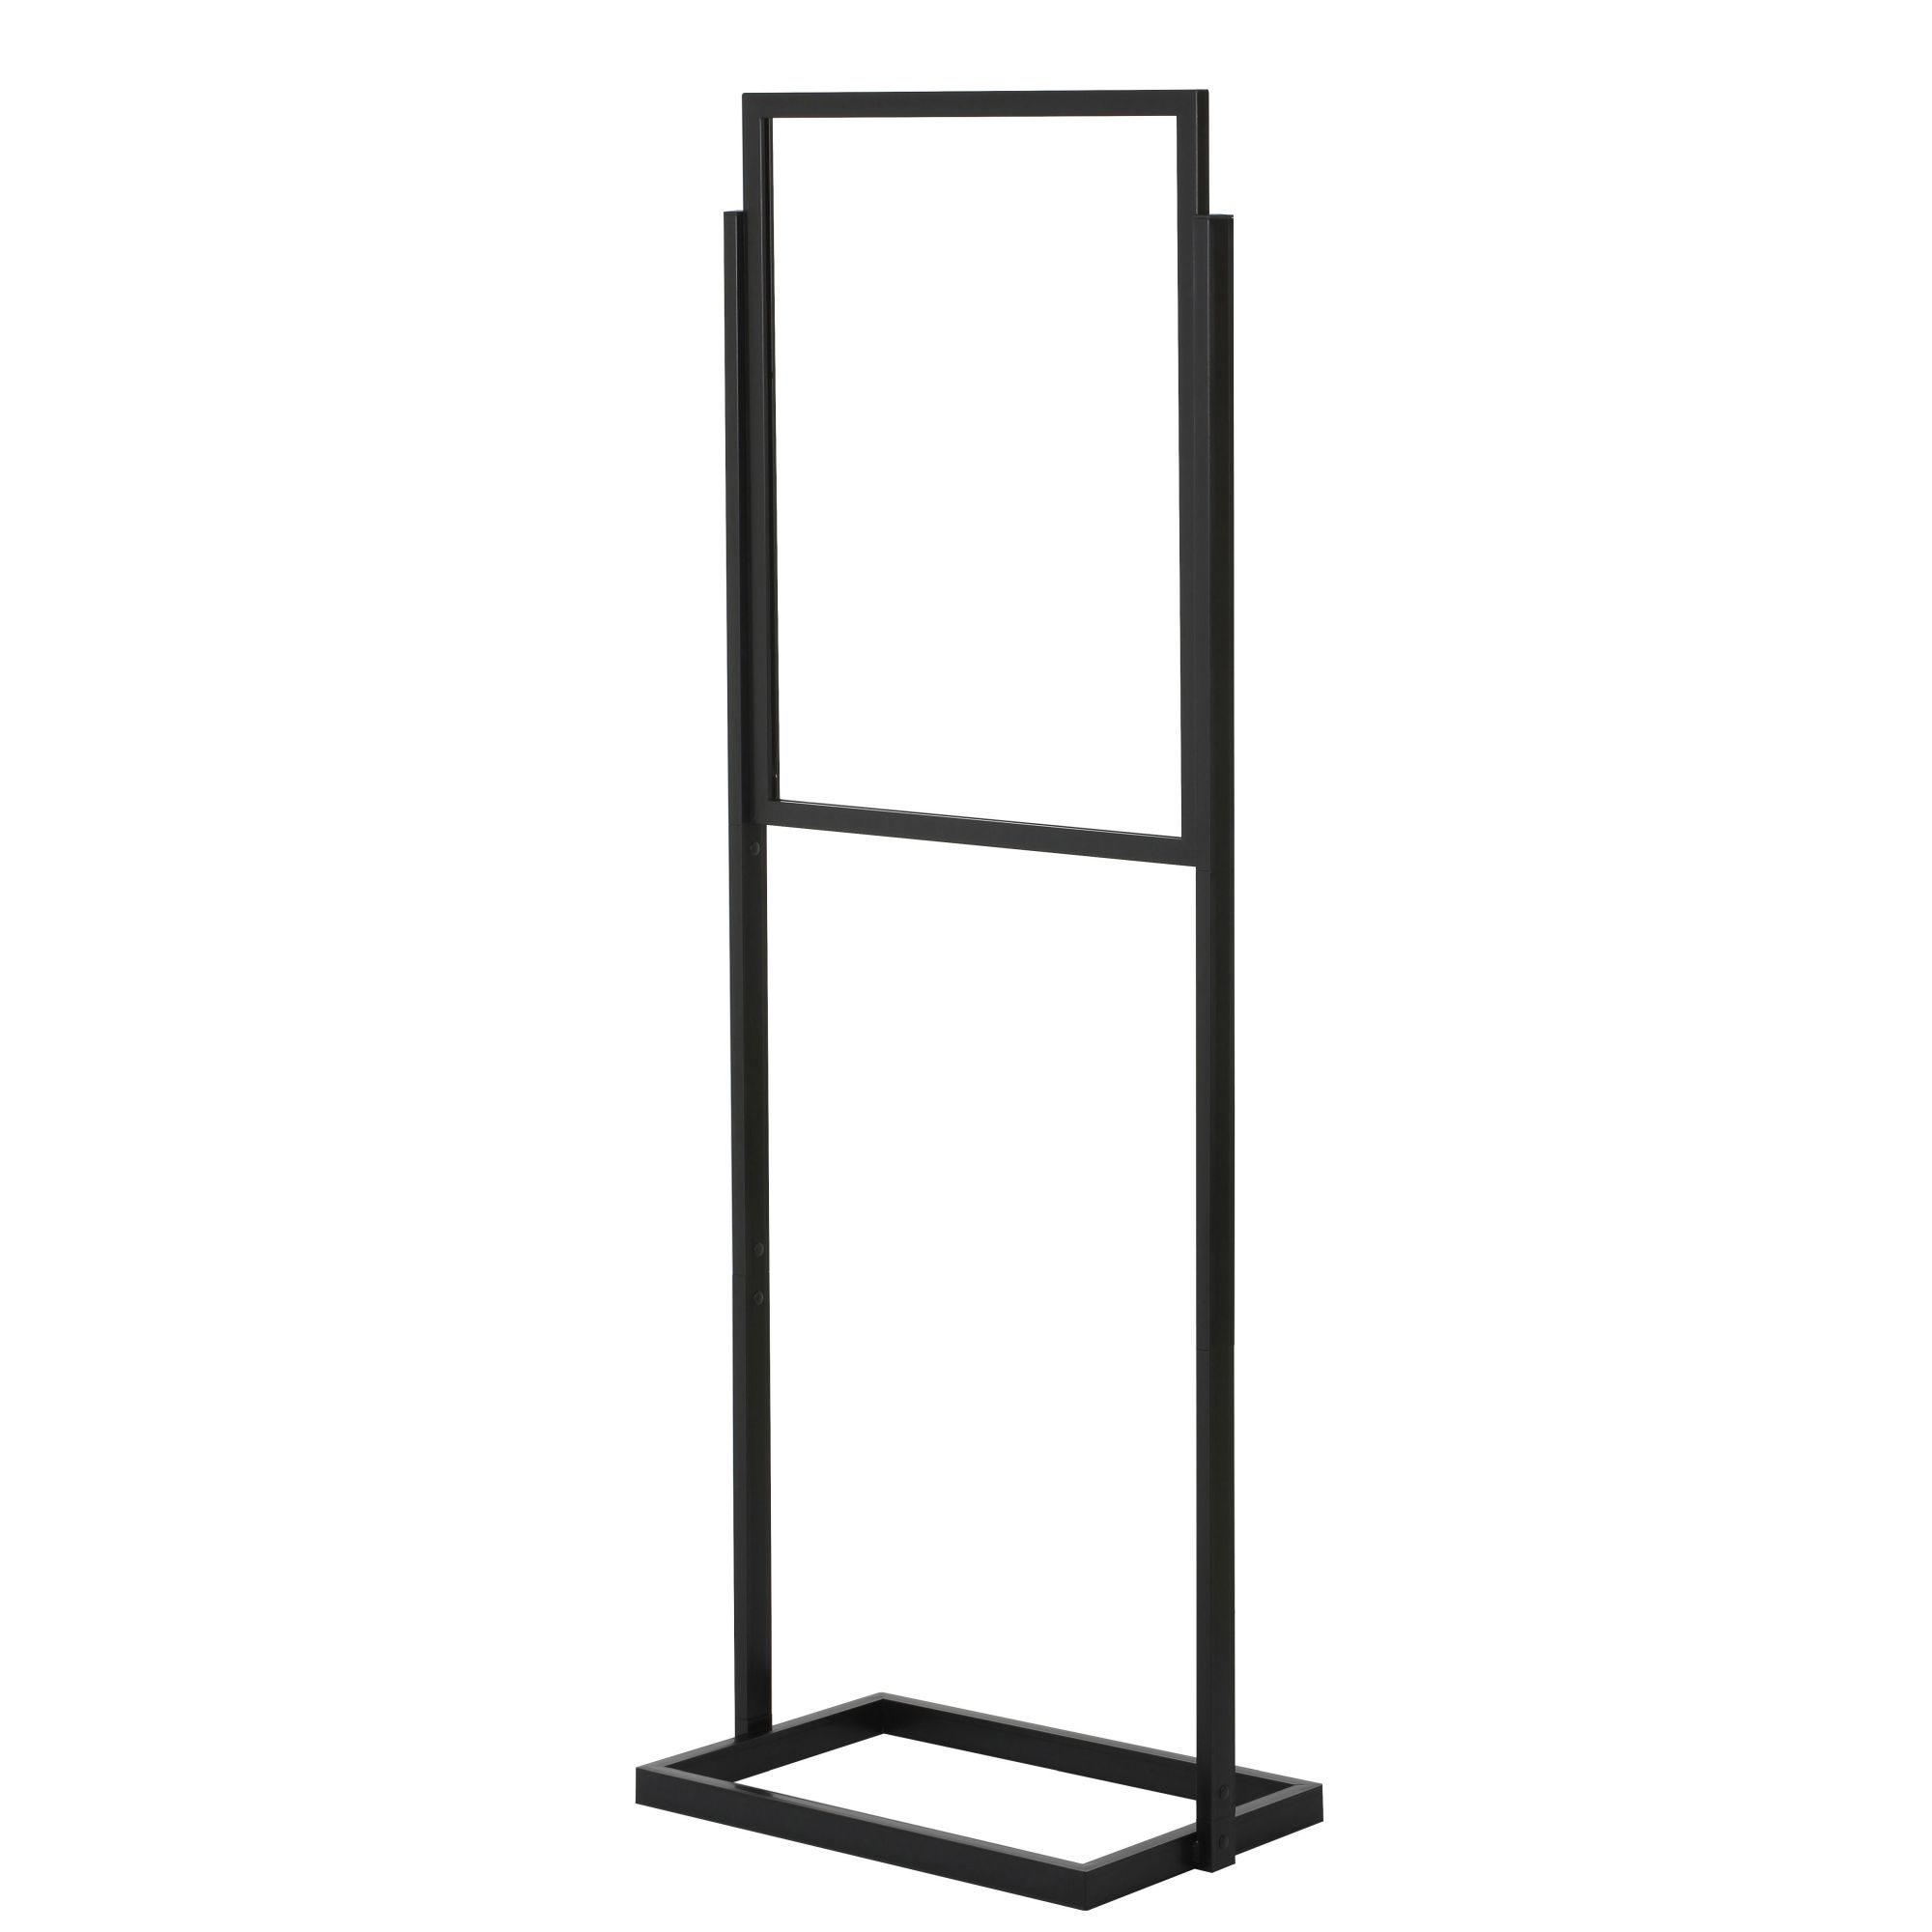 24 x 36 Inch INDOOR All Aluminum A-Frame Sign Holder Stand. Made in USA